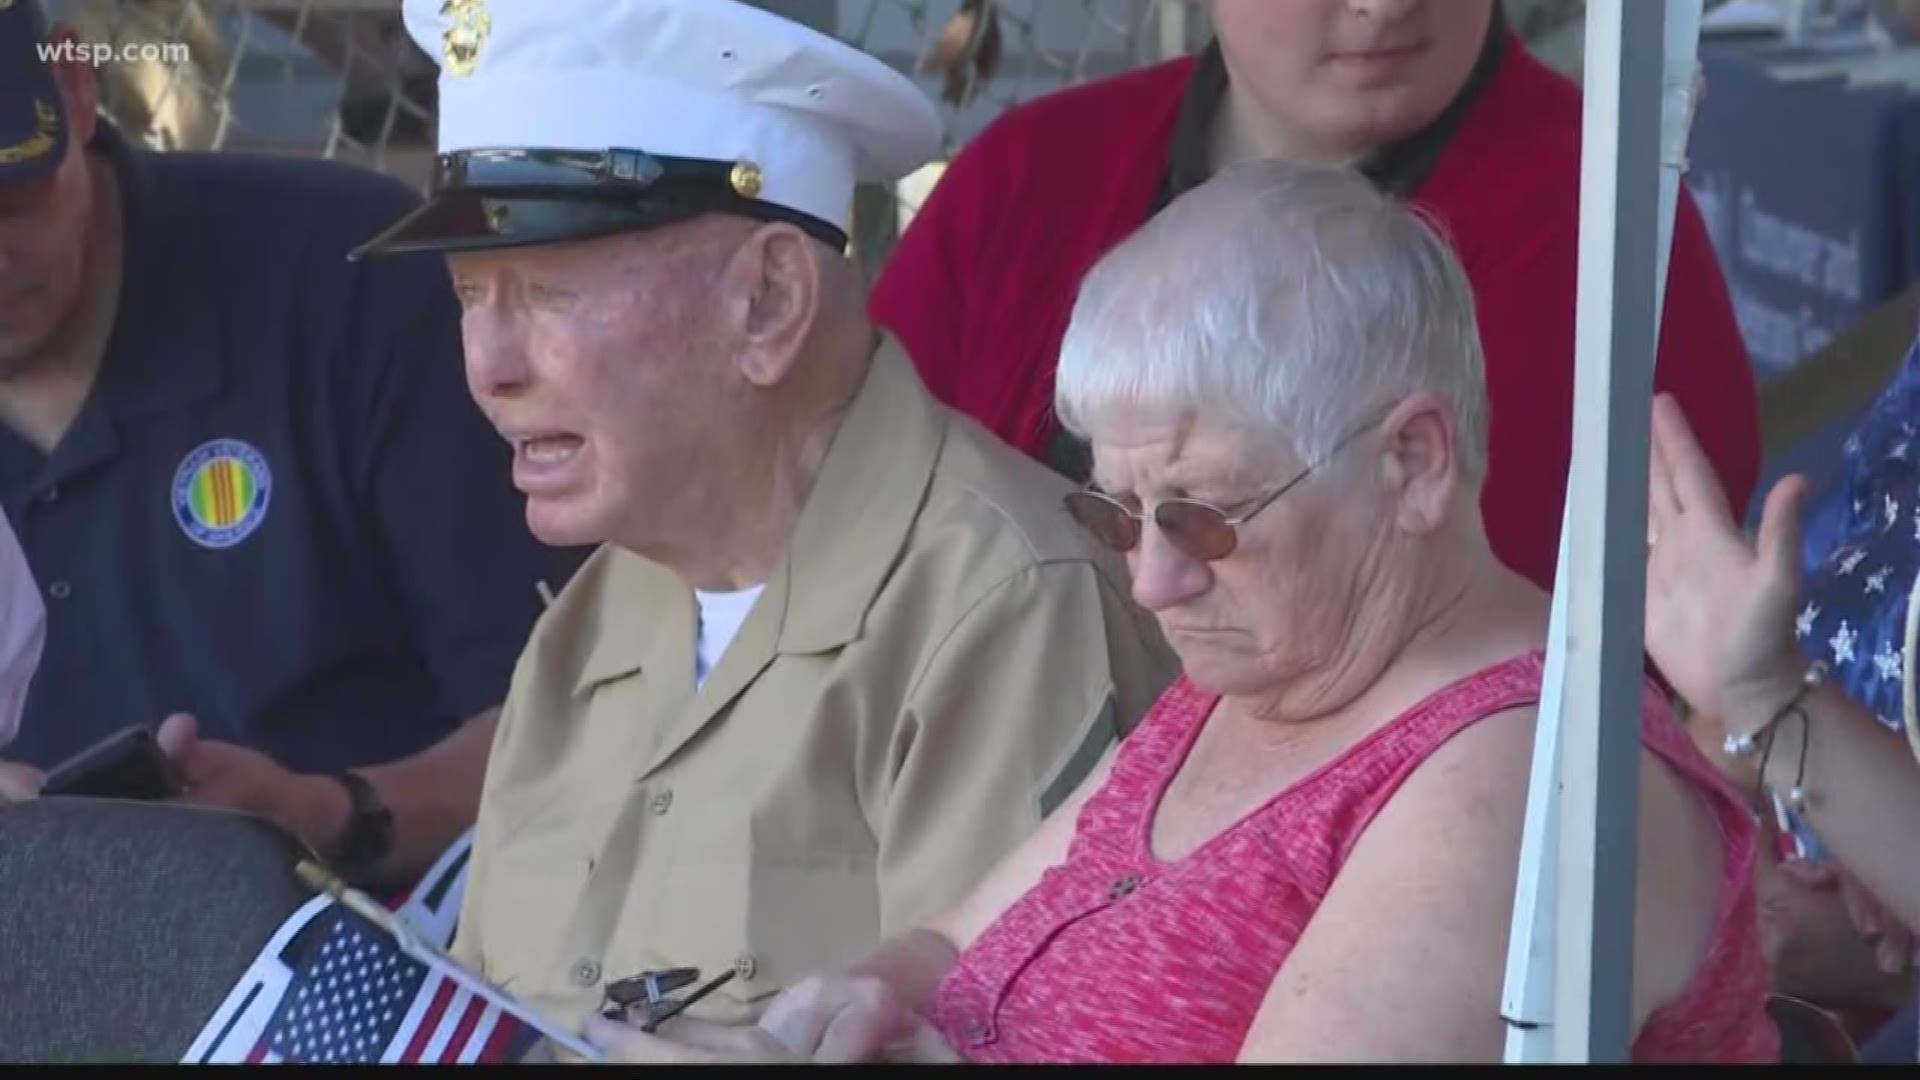 Veterans Day ceremonies are taking place at several locations today